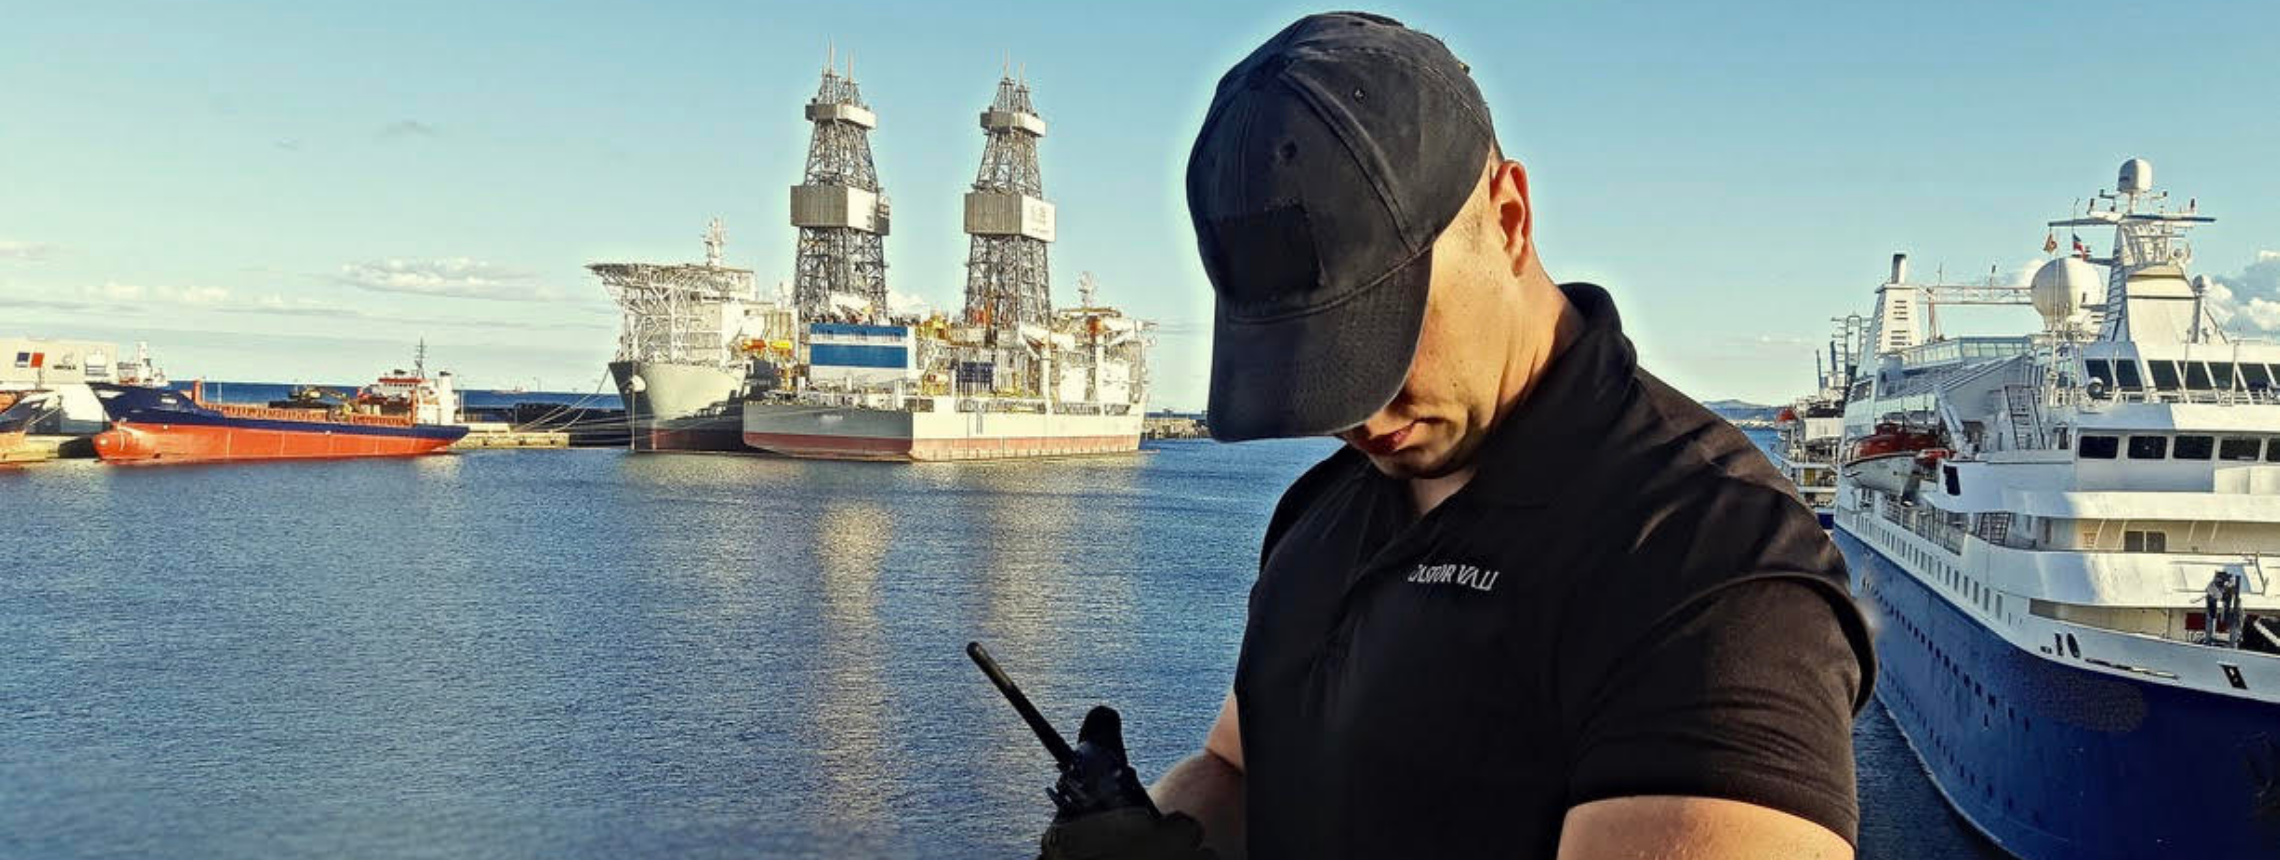 Castor Vali Security Liaison personnel looking at watch infront of ships at sea.